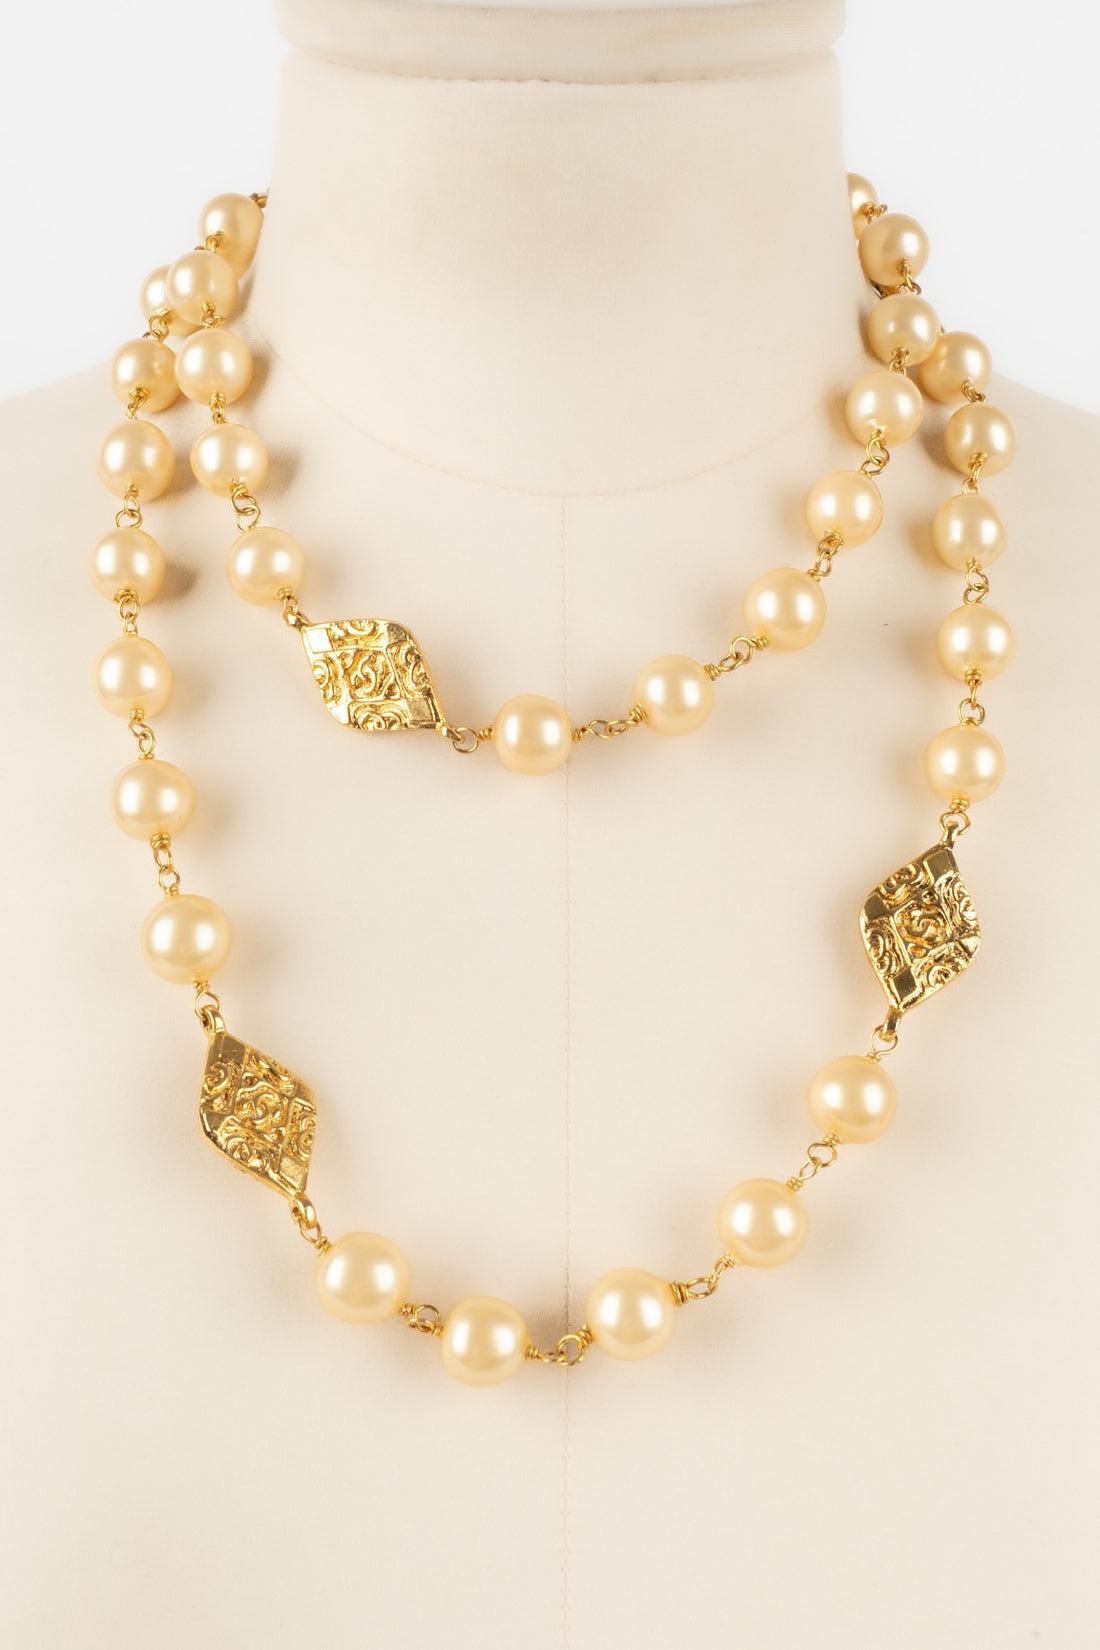 Women's Chanel Costume Pearls Necklace For Sale